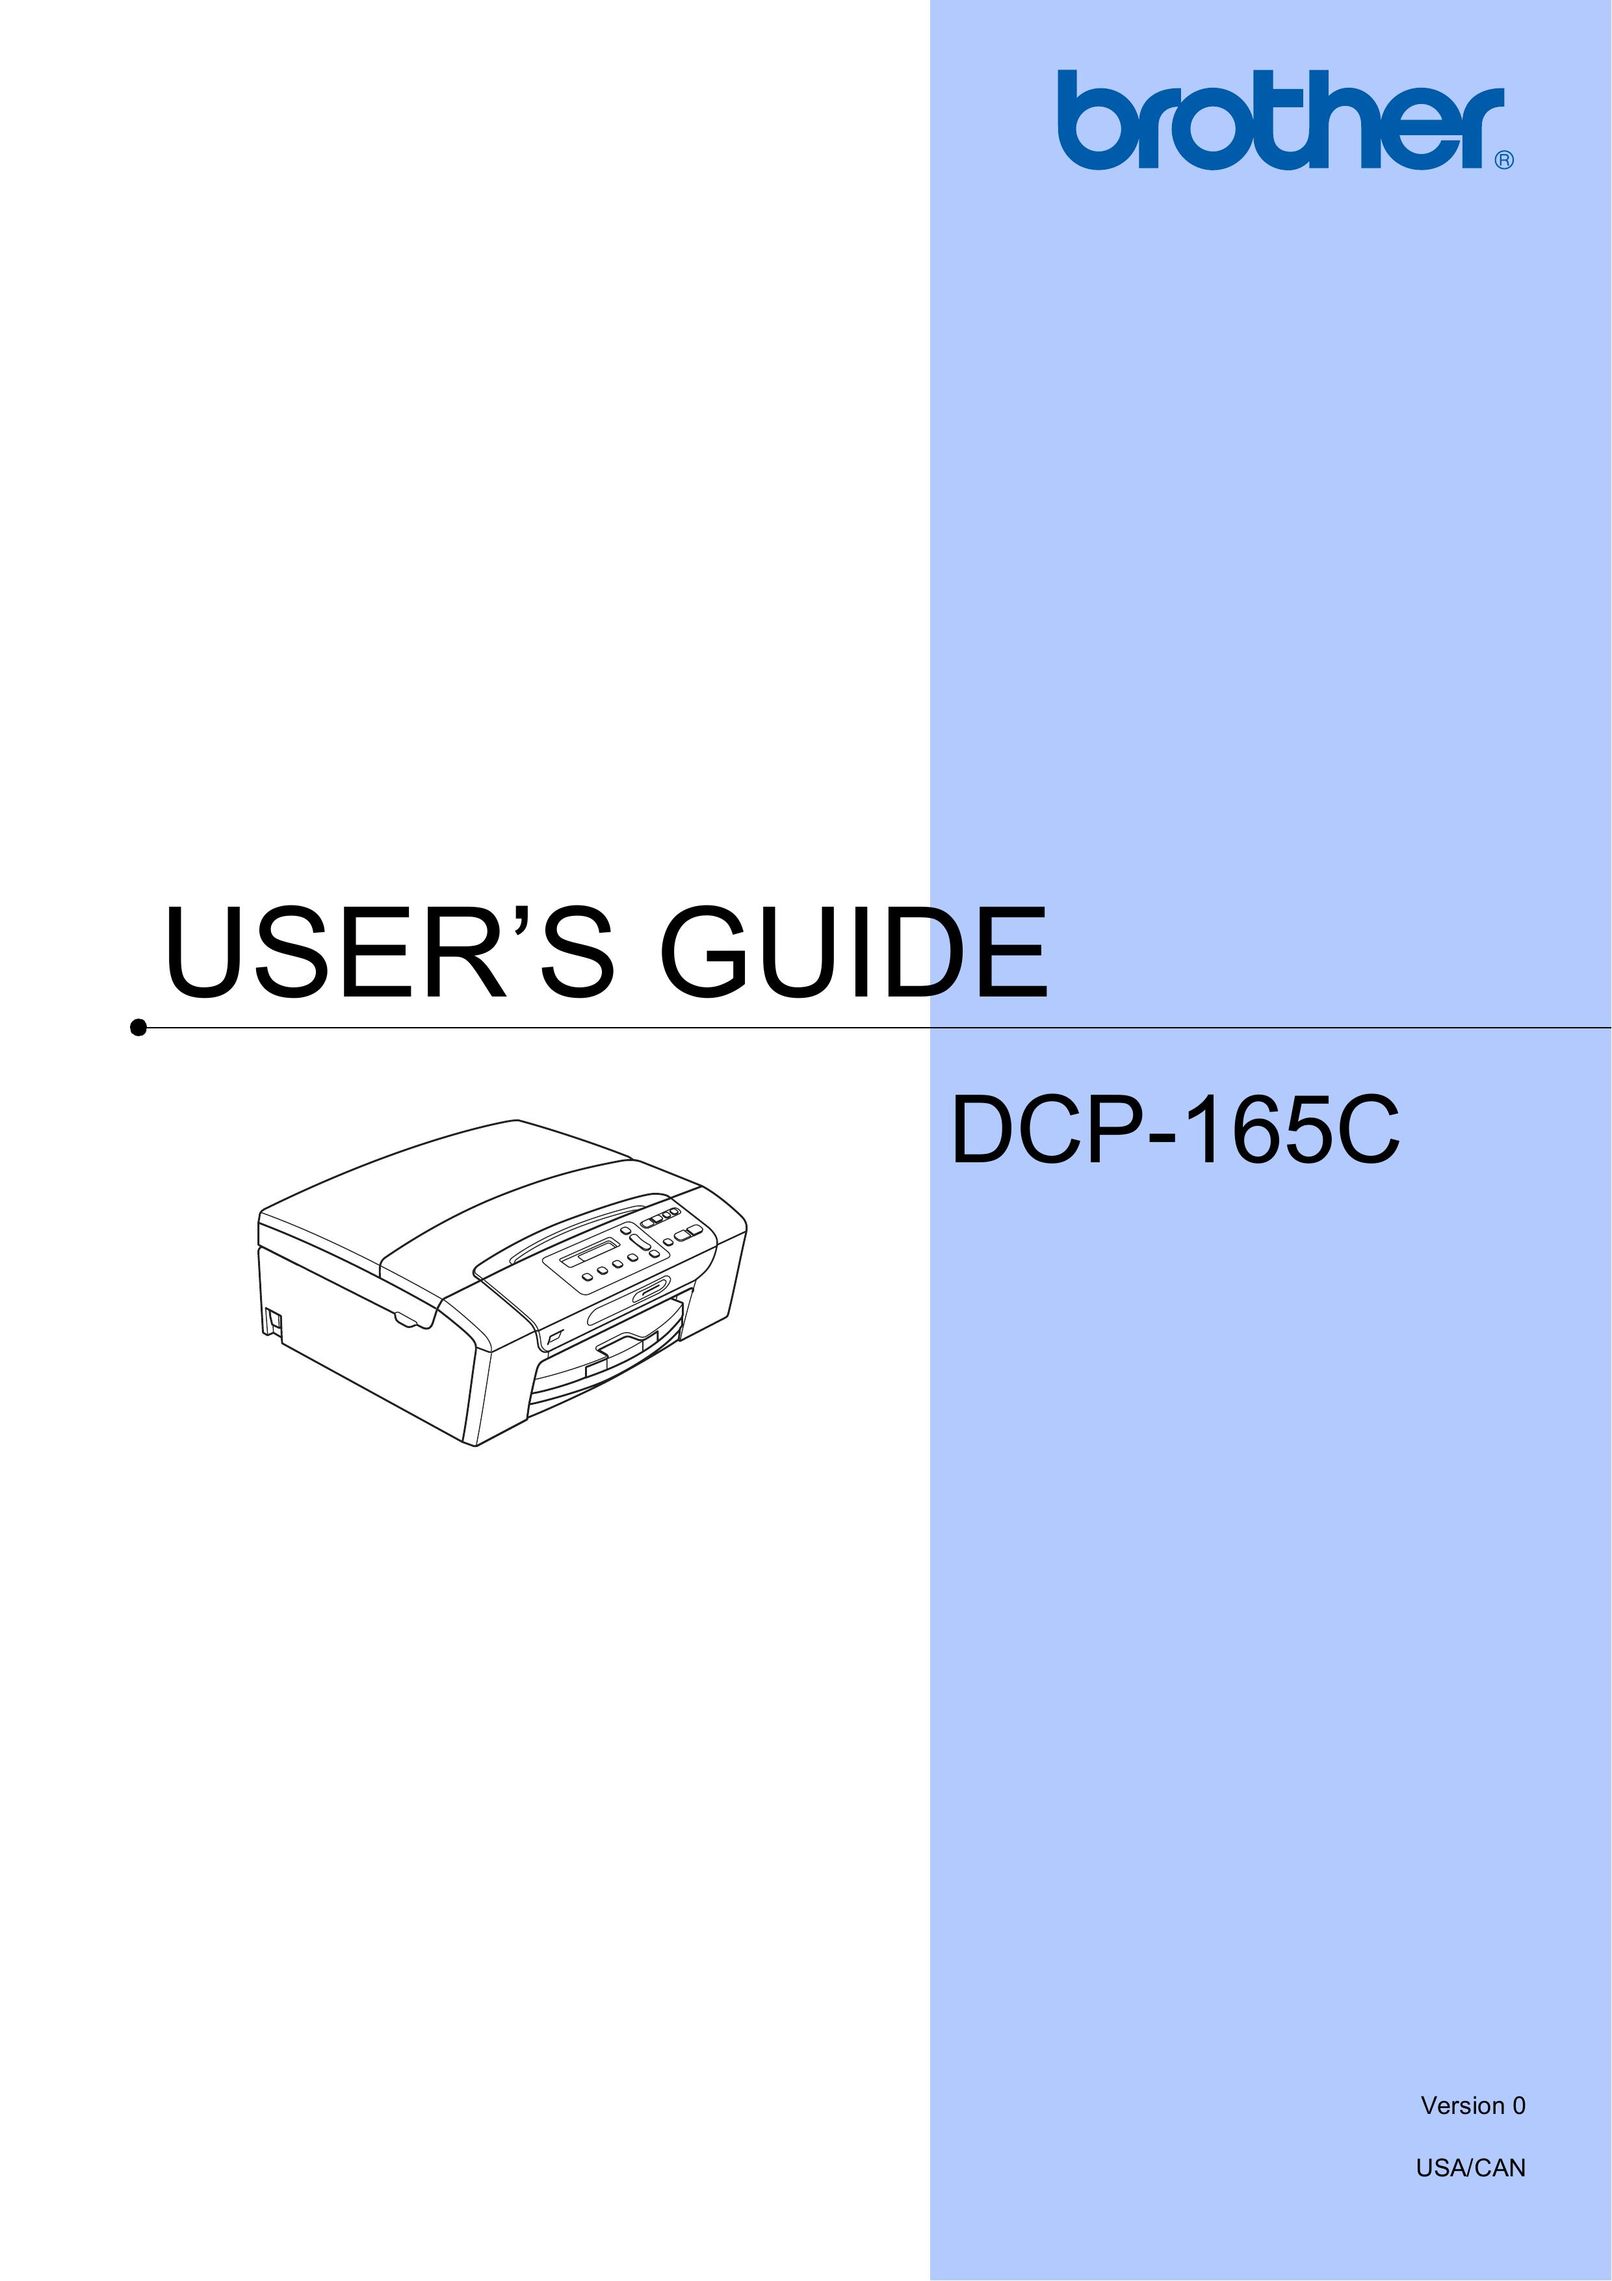 Brother DCP-165C Scanner User Manual